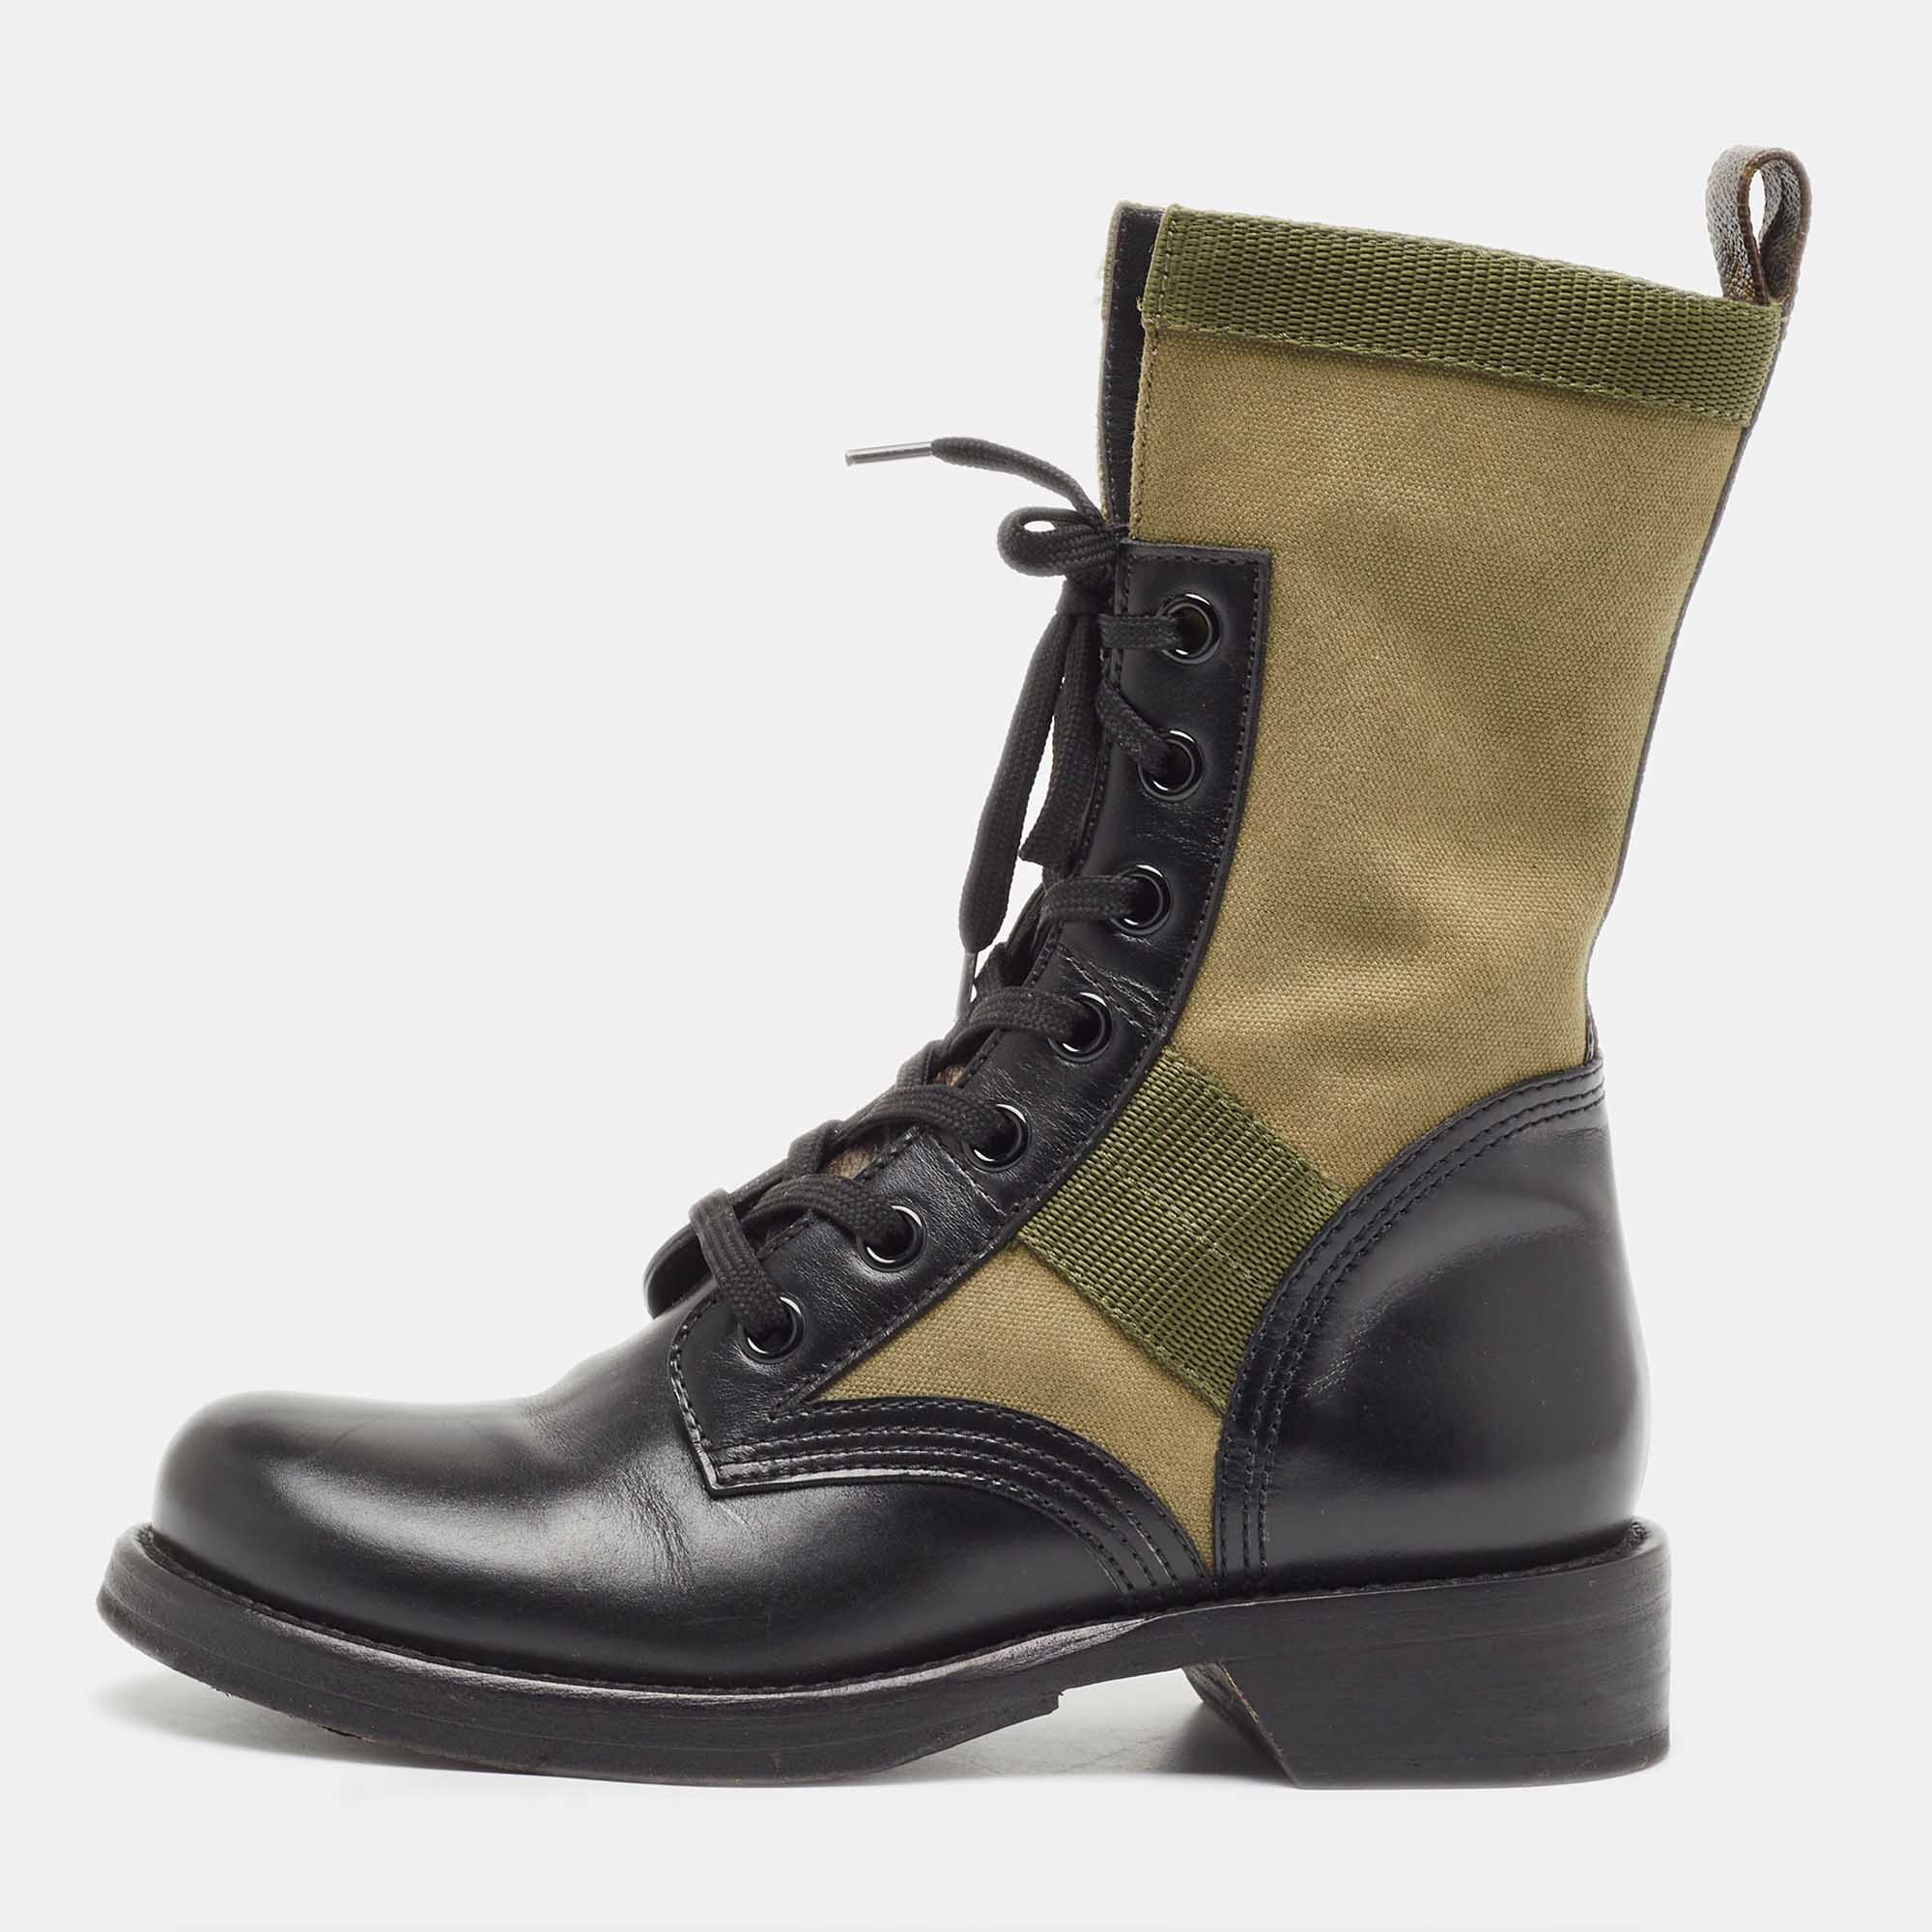 Pre-owned Louis Vuitton Black/green Canvas And Leather Wonderland Flat Ranger Boots Size 37.5